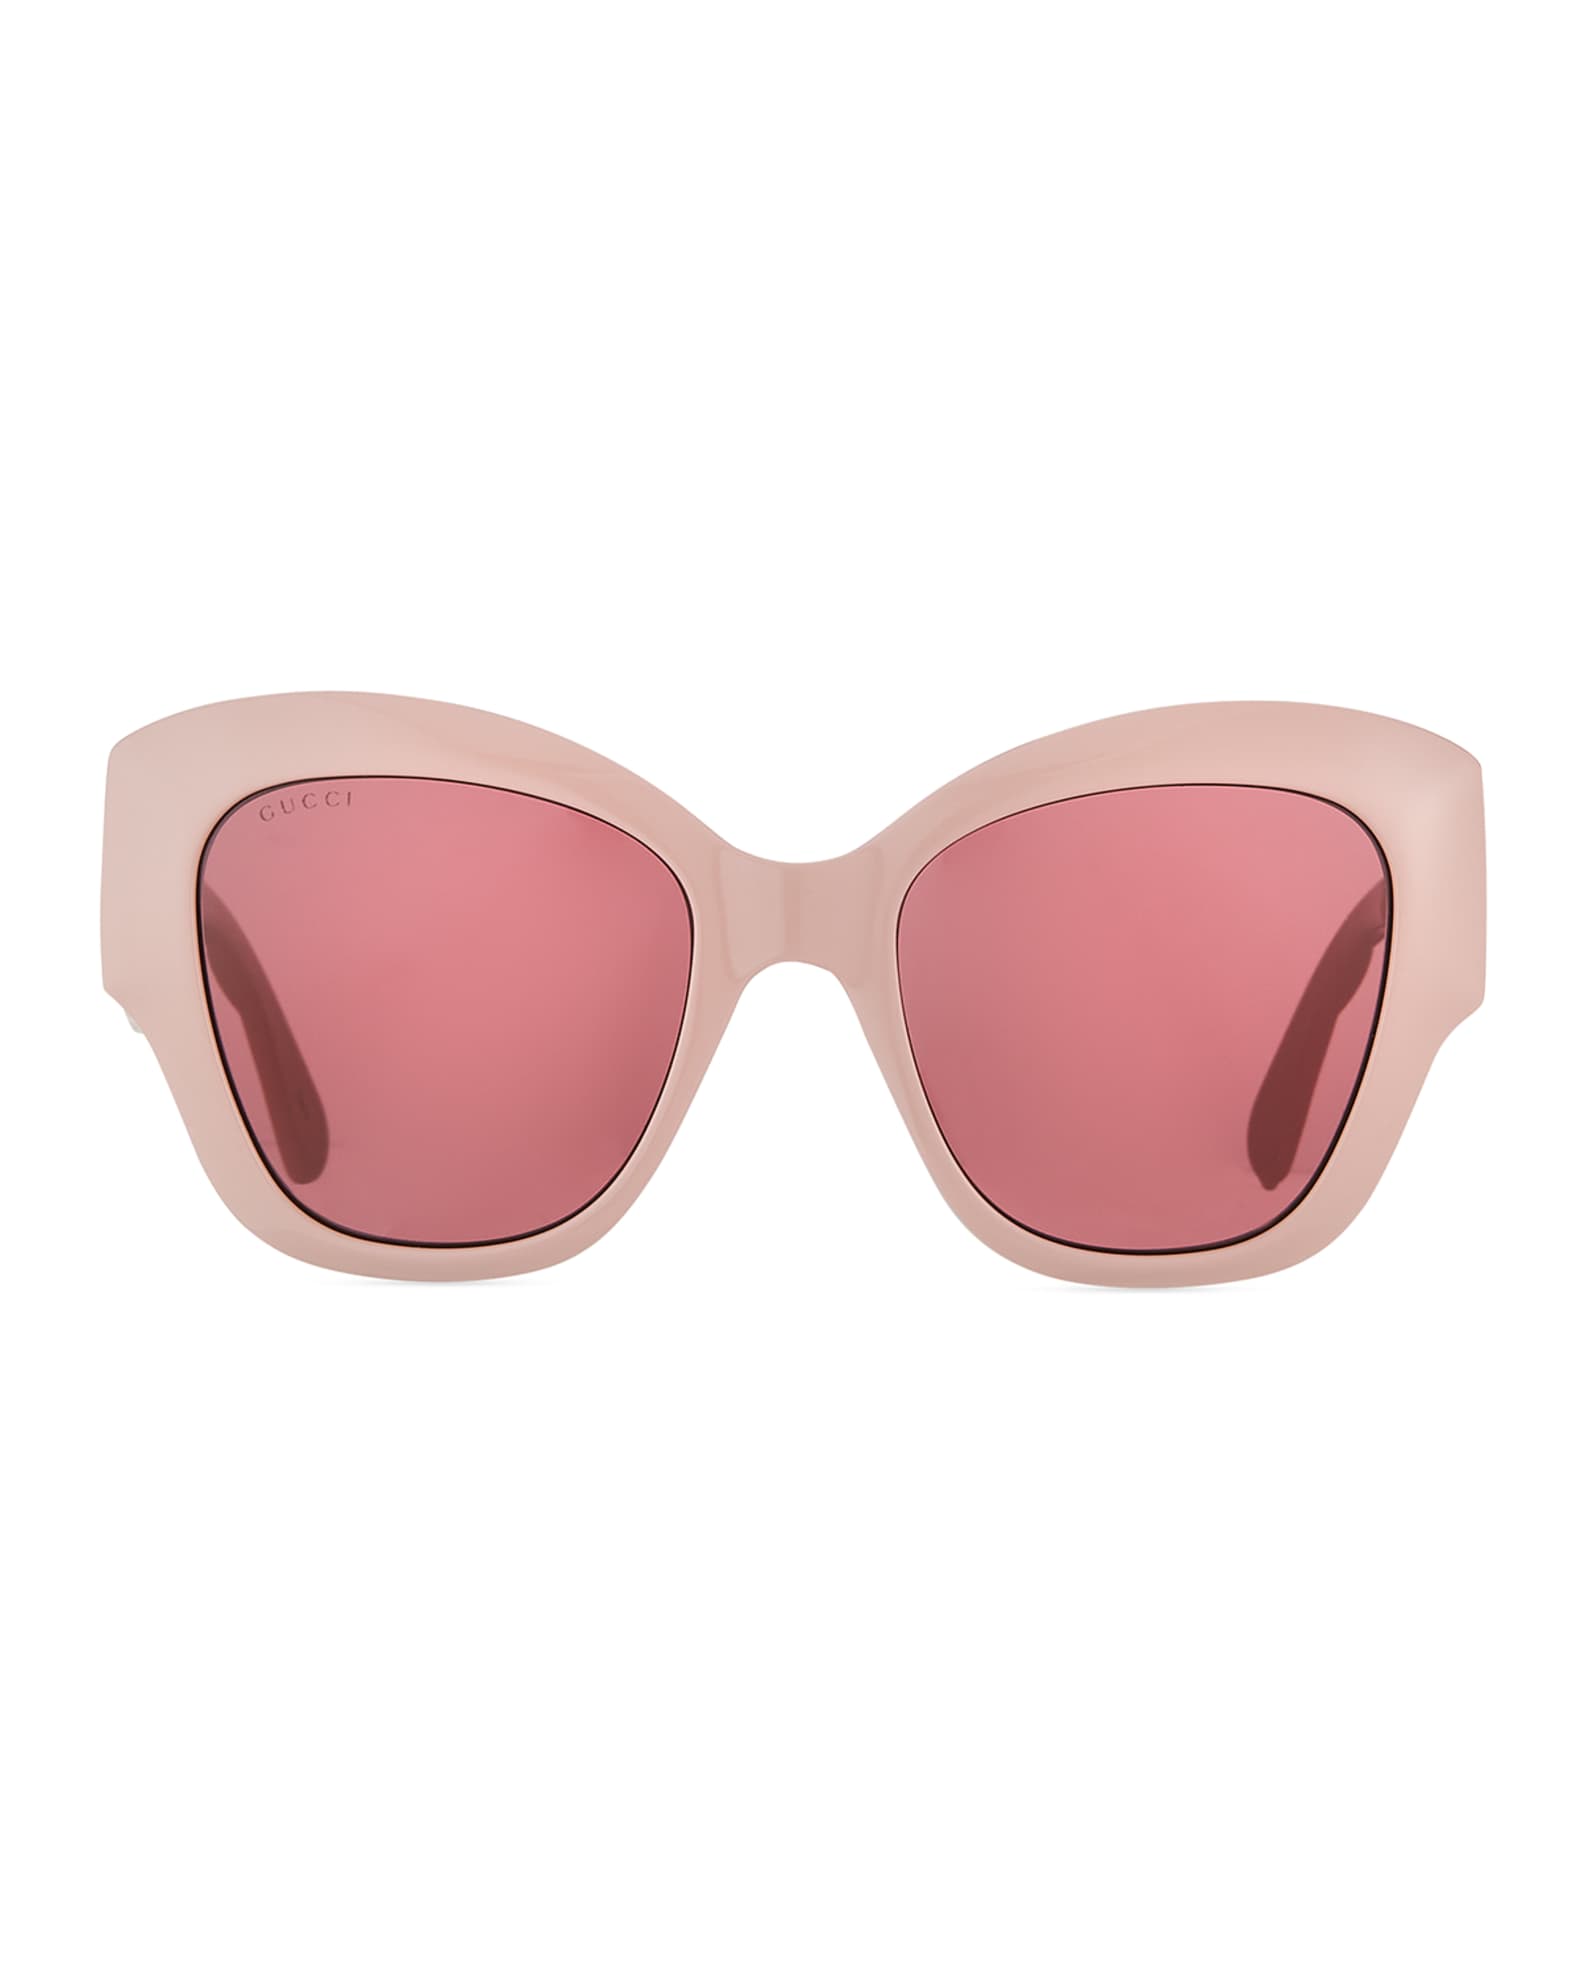 Gucci Oversized Acetate Butterfly Sunglasses | Neiman Marcus